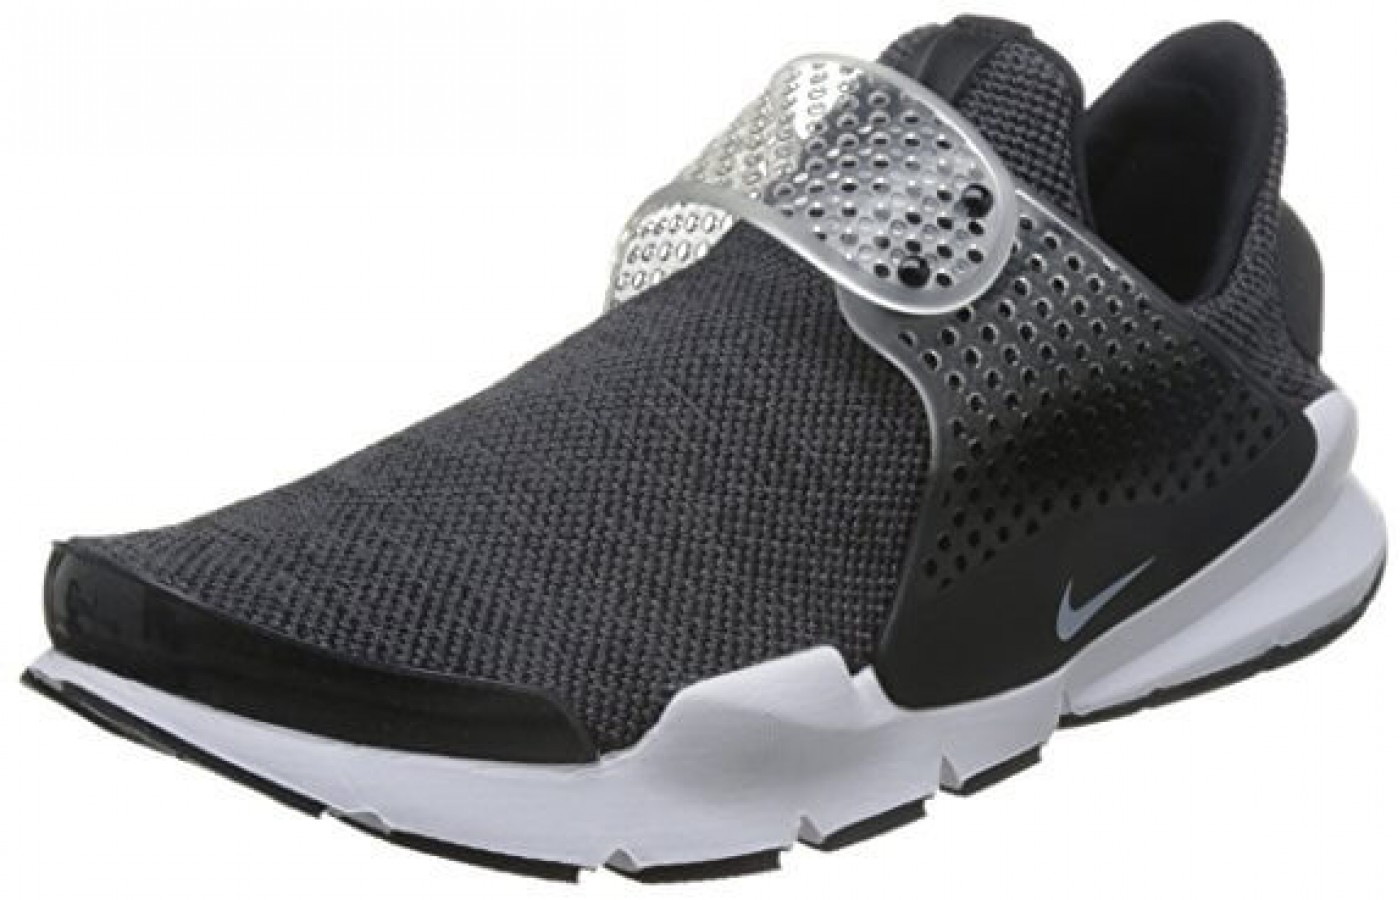 The Nike Sock Dart SE Premium angled front perspective